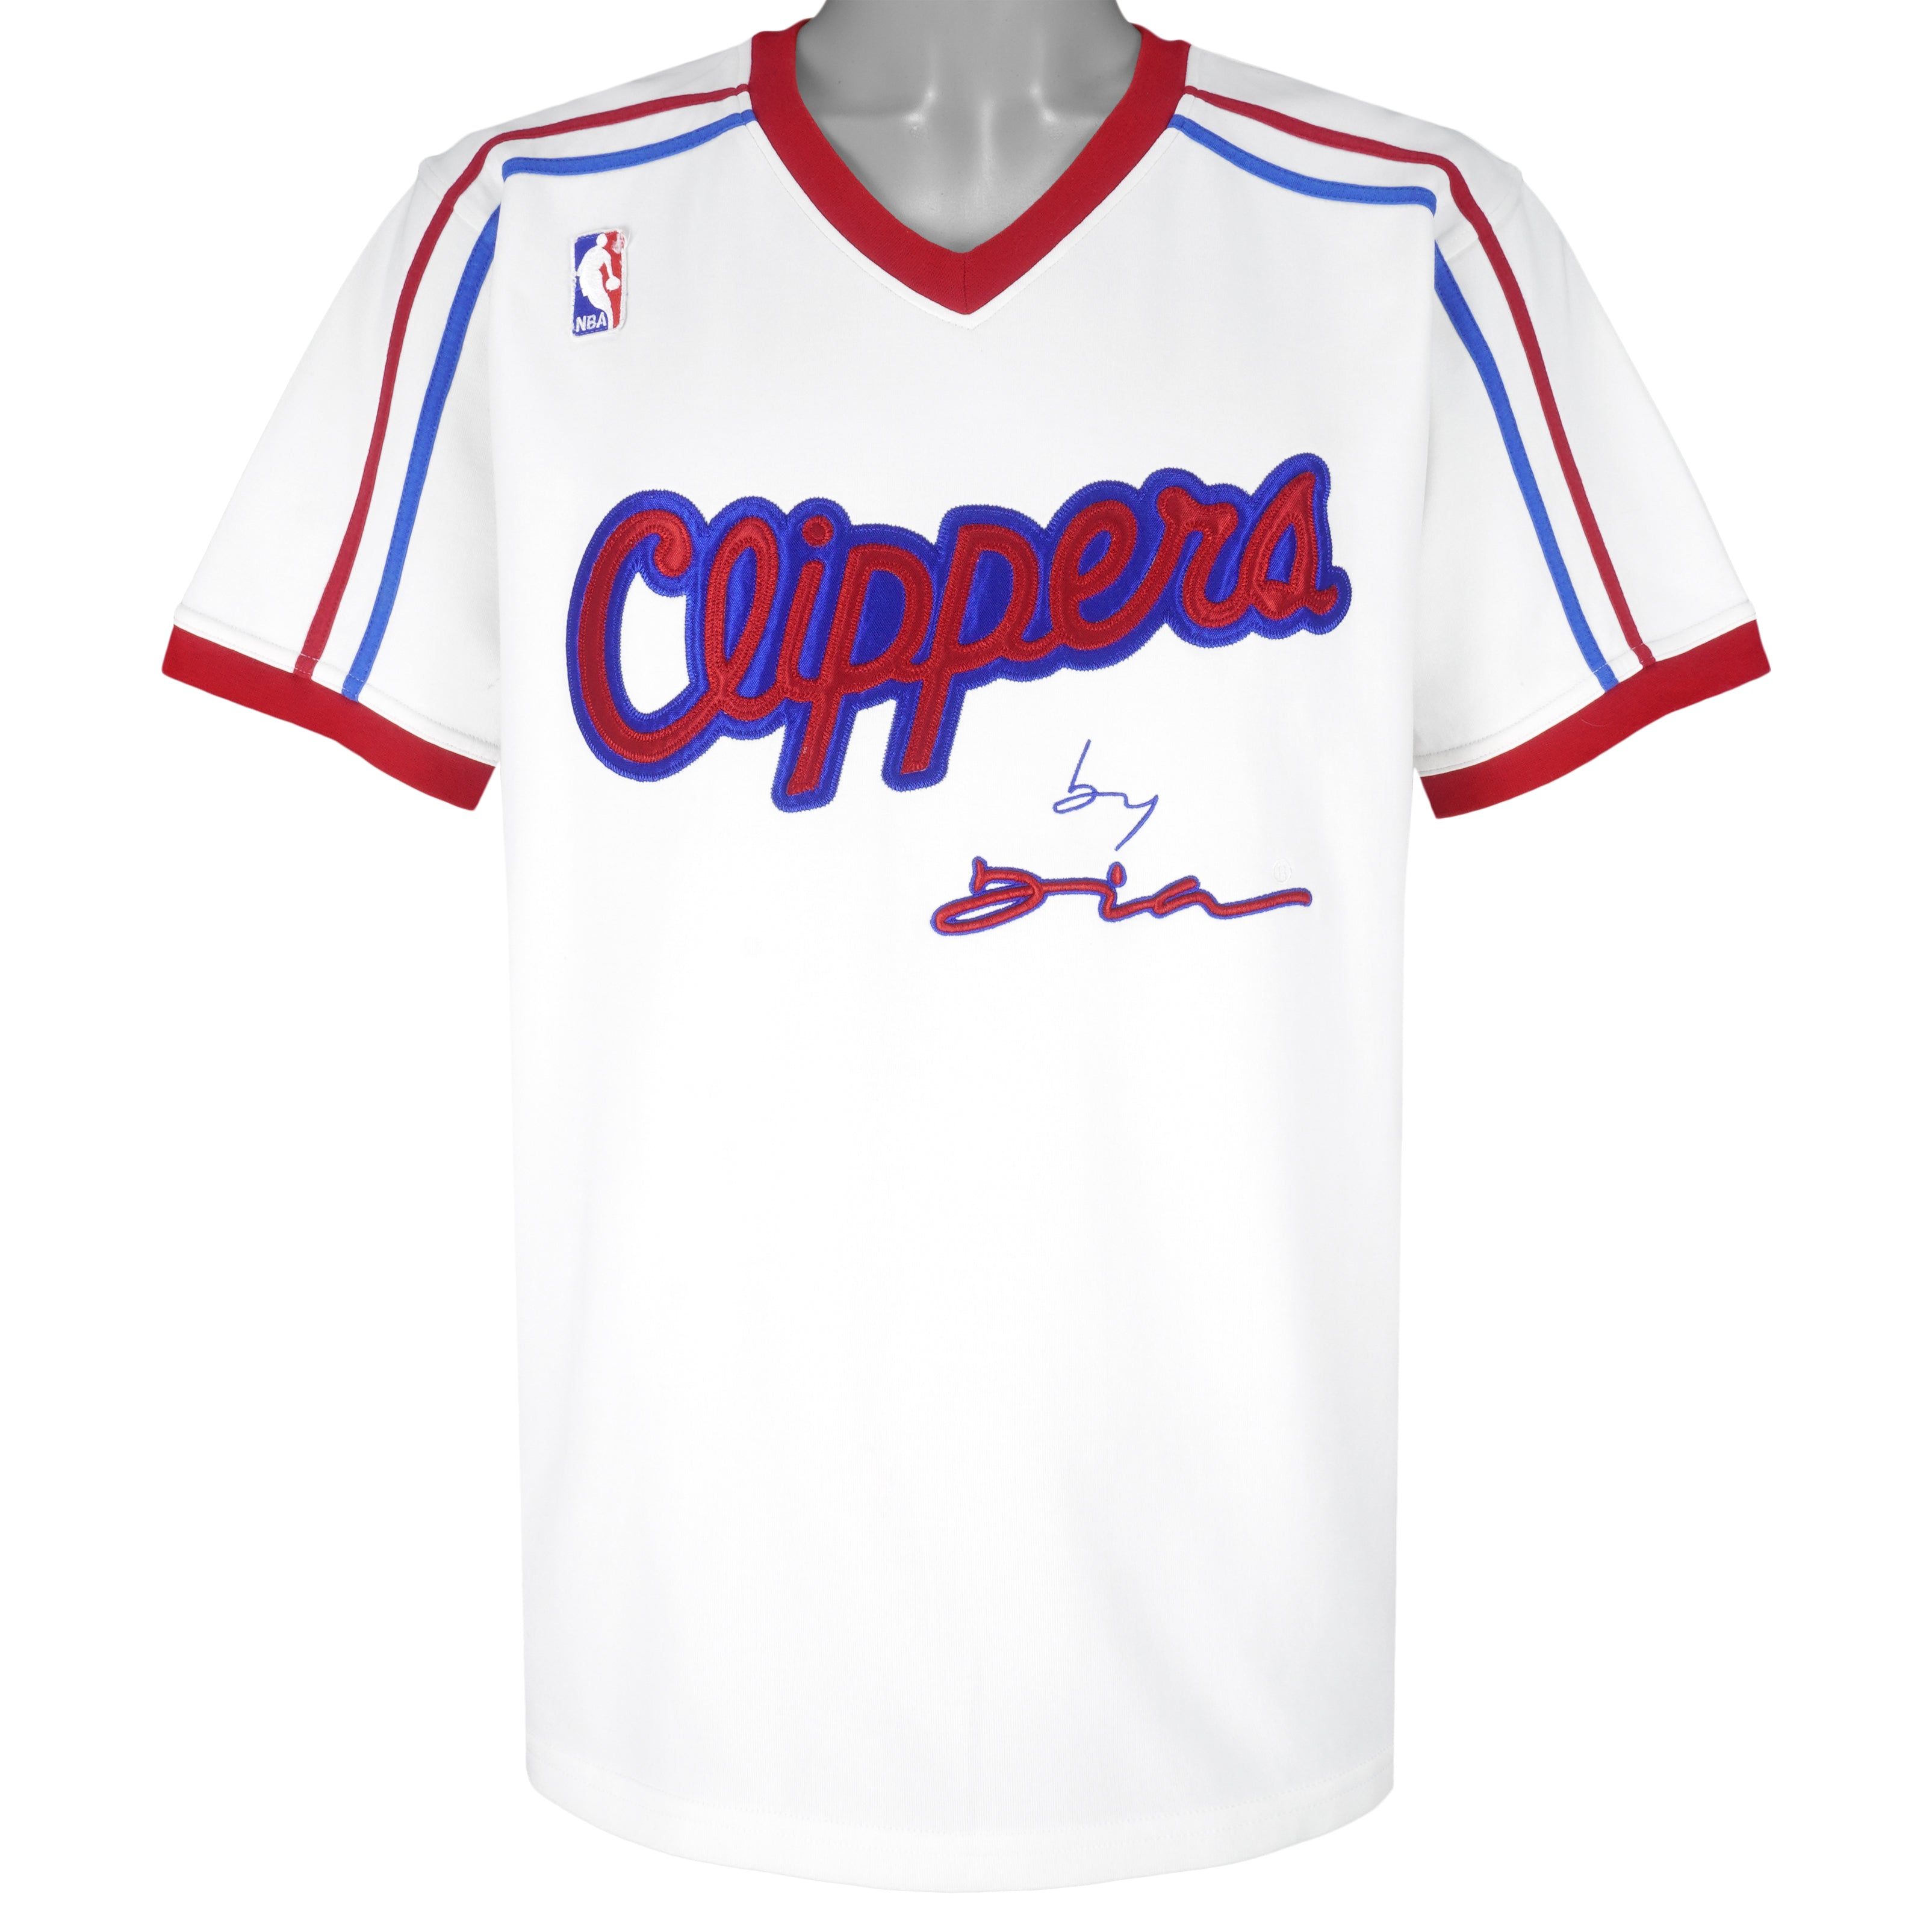 Los Angeles Clippers NBA Basketball Sports Team LA Clippers Tshirt